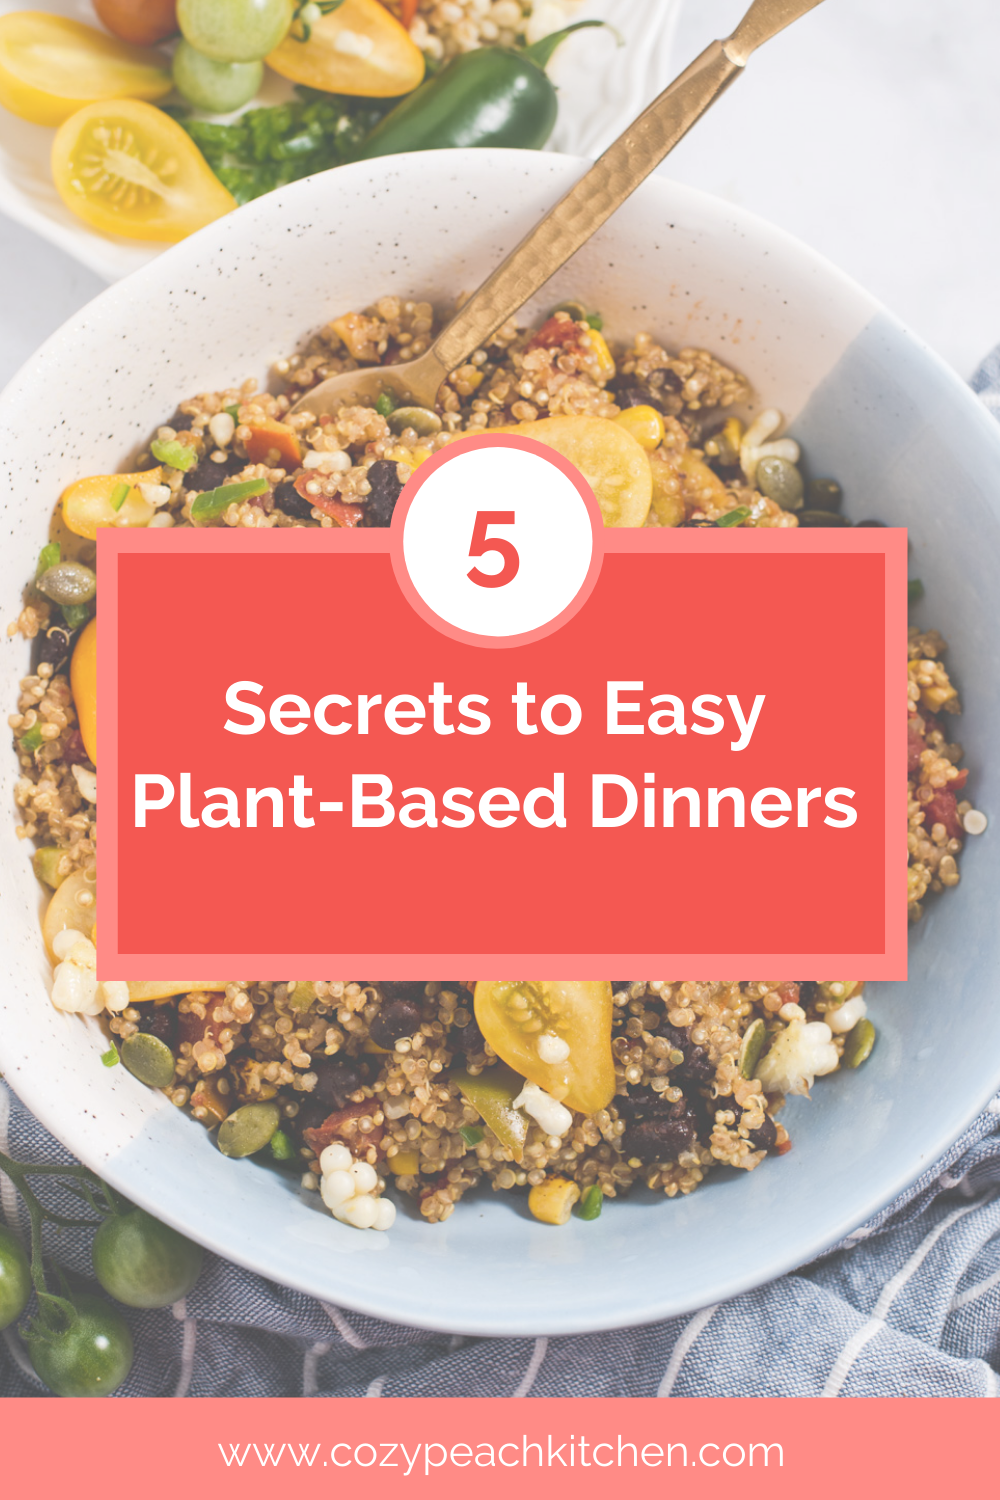 Graphic with title "5 Secrets to Easy Plant Based Dinners".